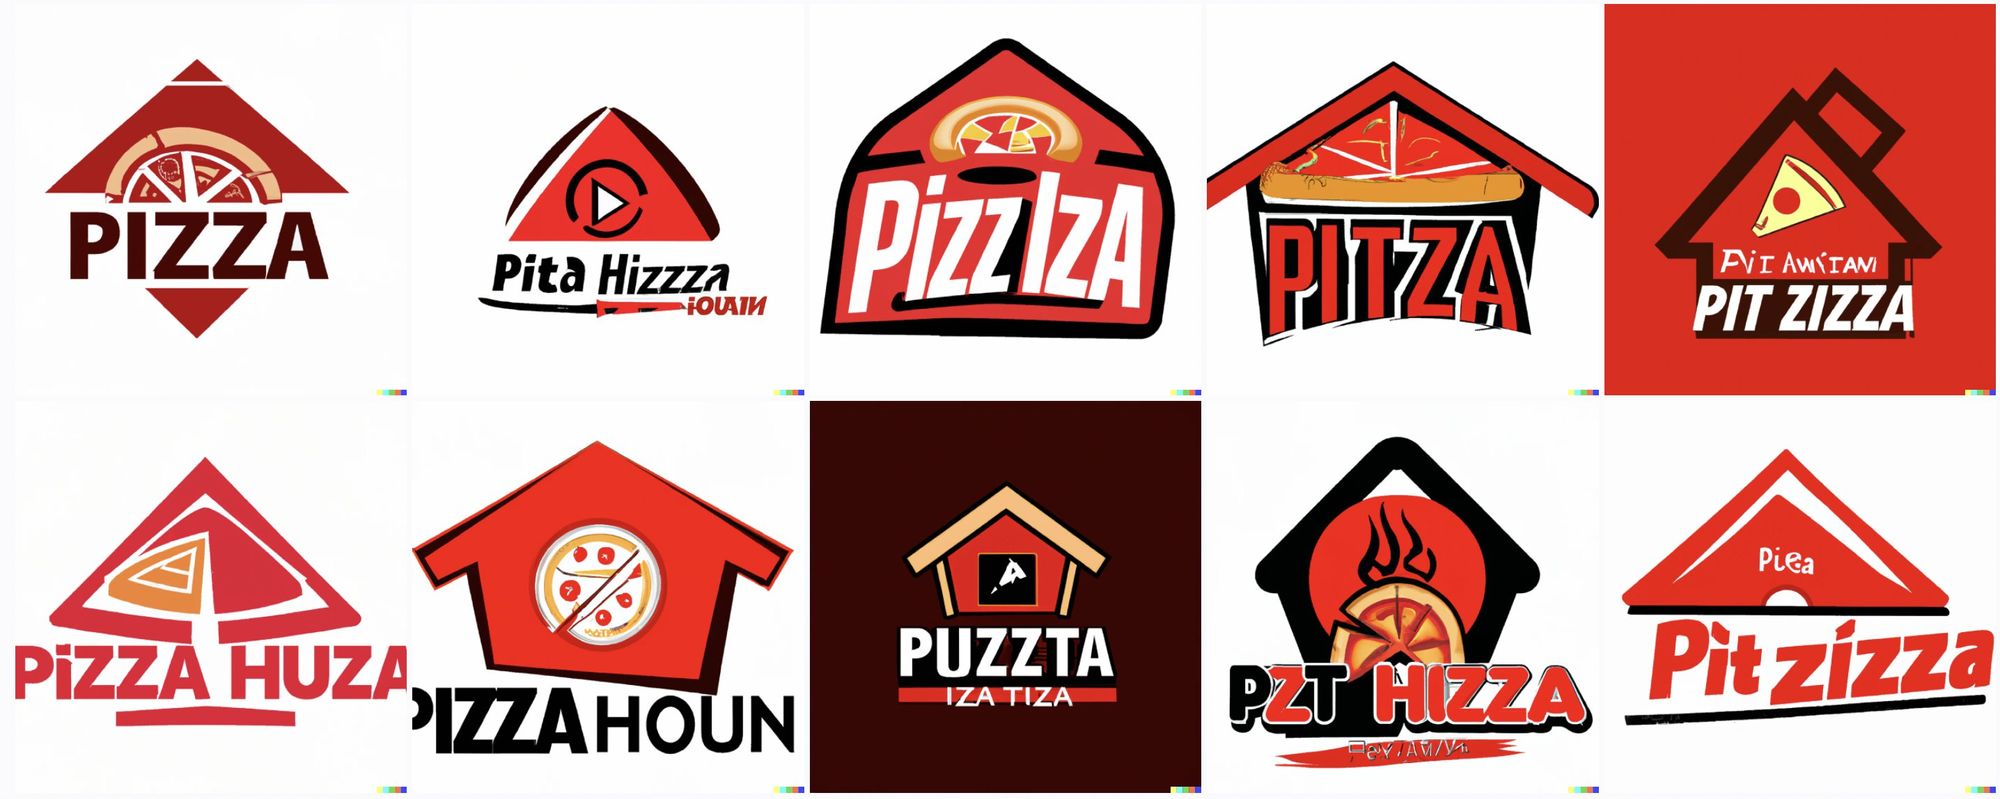 Various logos in black and red, some with small pizzas or wedges of pizza on them. They read variations on "pizza huza" and "Pitza" and "Pit zizza"